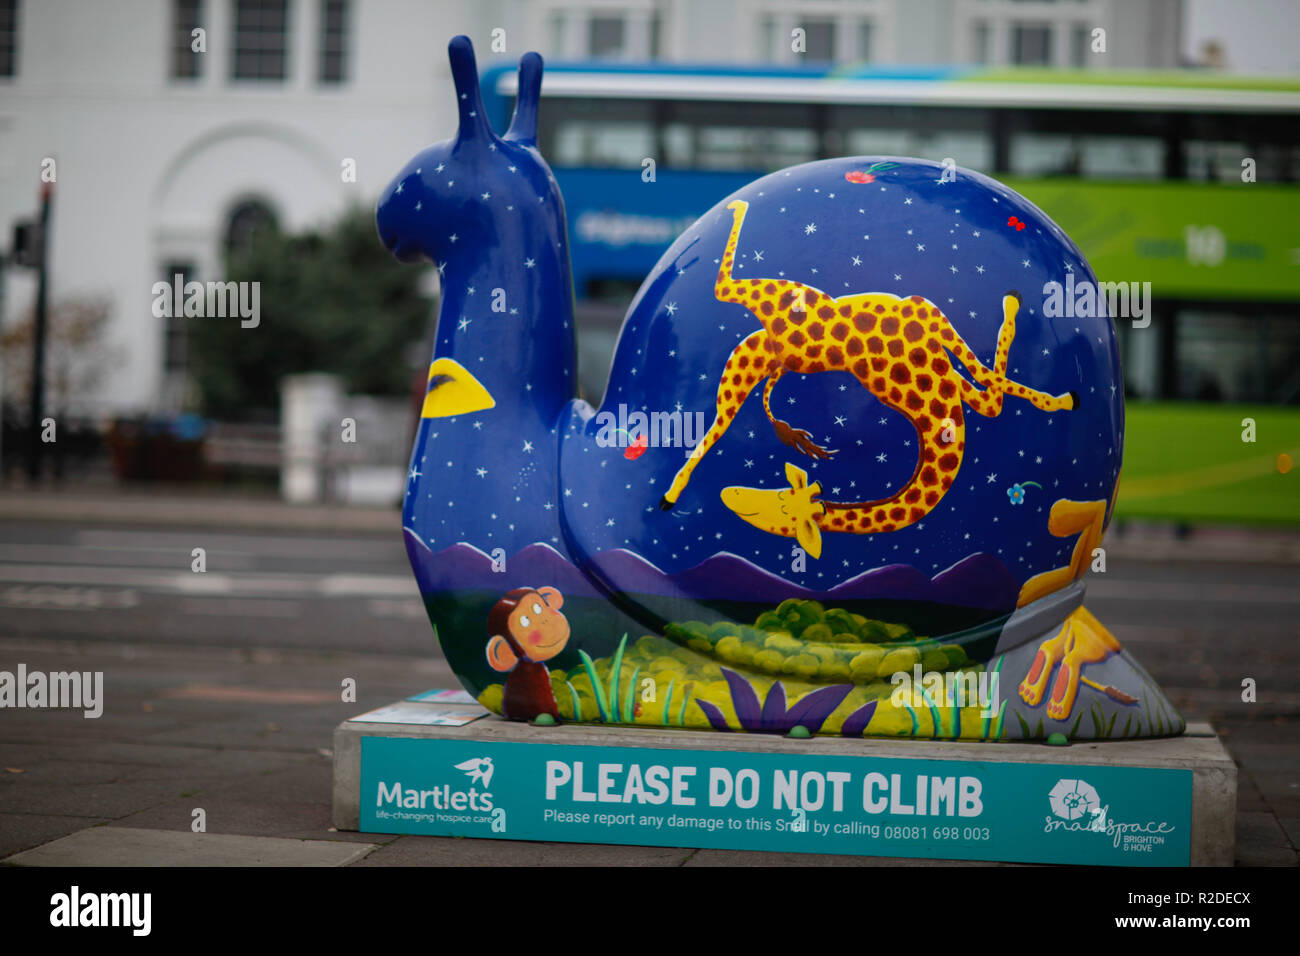 November 15, 2018 - Brighton and Hove are currently full of giant snails as part of a fundraising art trail to raise funds forthe Martlets Hospice. Fifty giant snail have been on display around Brighton and Hove September 15 until 18 November, with each giant snail sponsored by a local business and decorated by an artist as part of a city campaign to raise essential funds to support the Martlets Hospice. The trail, known as the Snailway, stretches between Brighton Marina and Hove Lagoon and up to Preston Park. A farewell Event will then bring them together and auction them to raise money for t Stock Photo